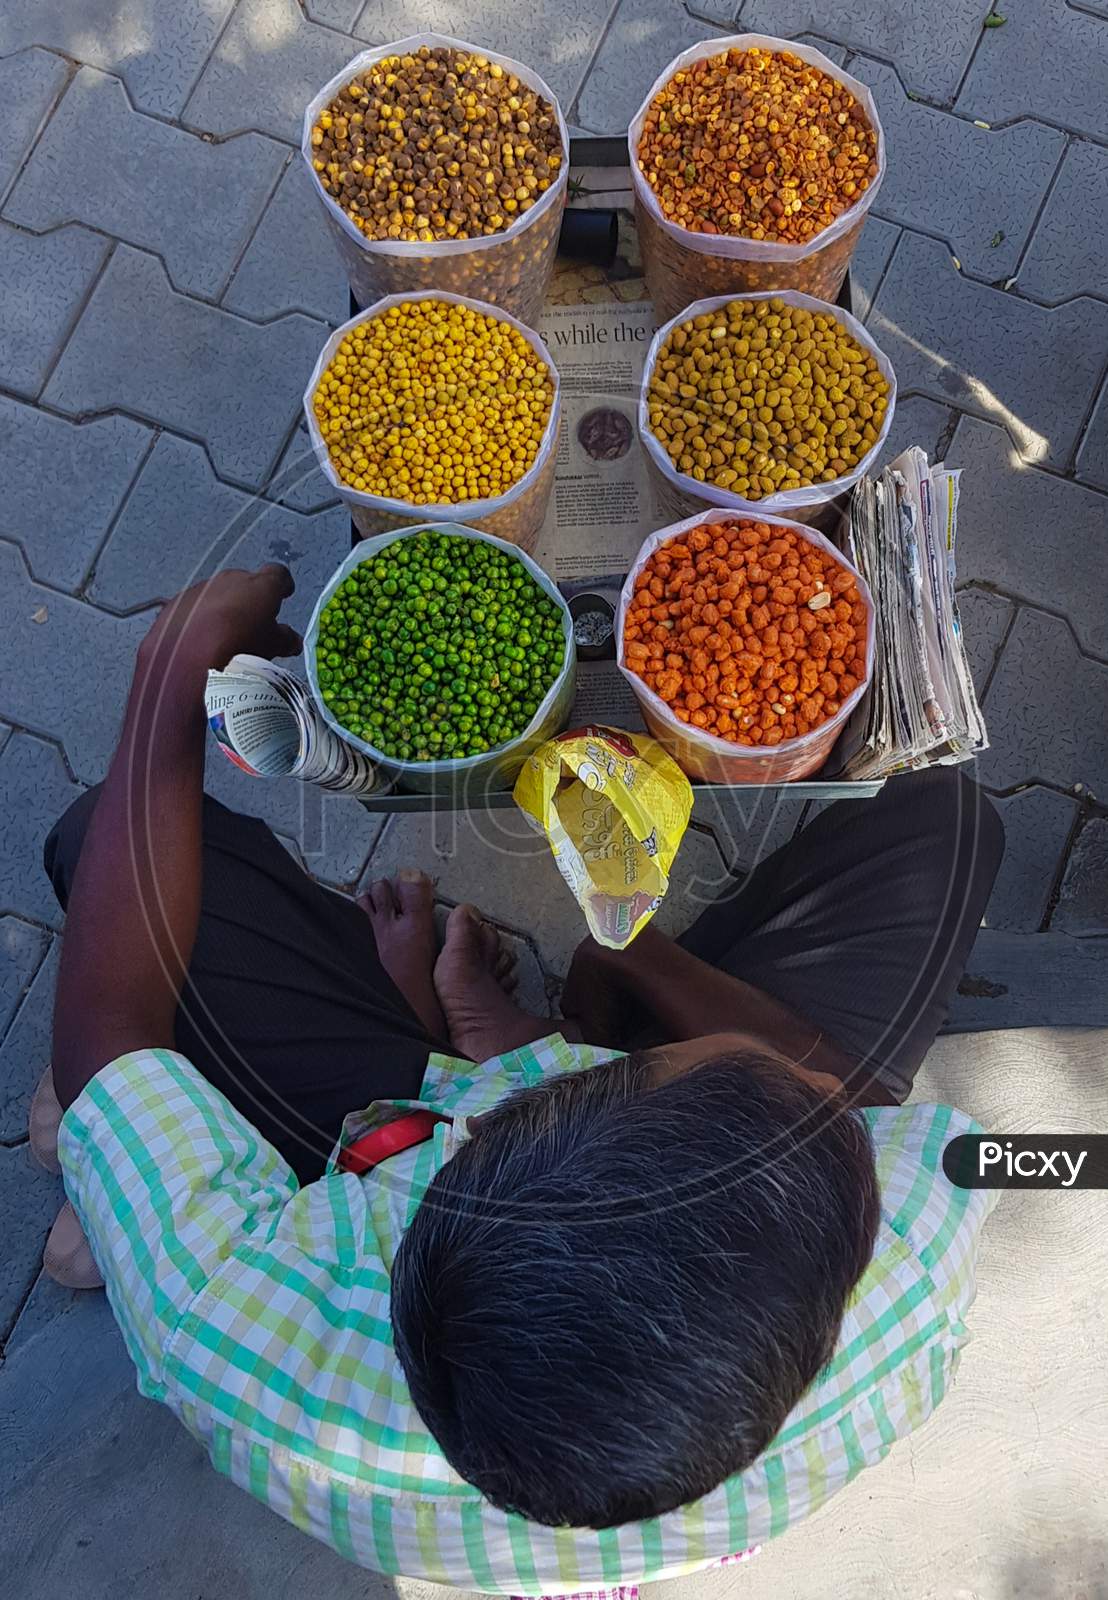 Bengaluru, Karnataka / India - September 01 2019: Looking down view of a man selling flavoured nuts on a footpath during daytime